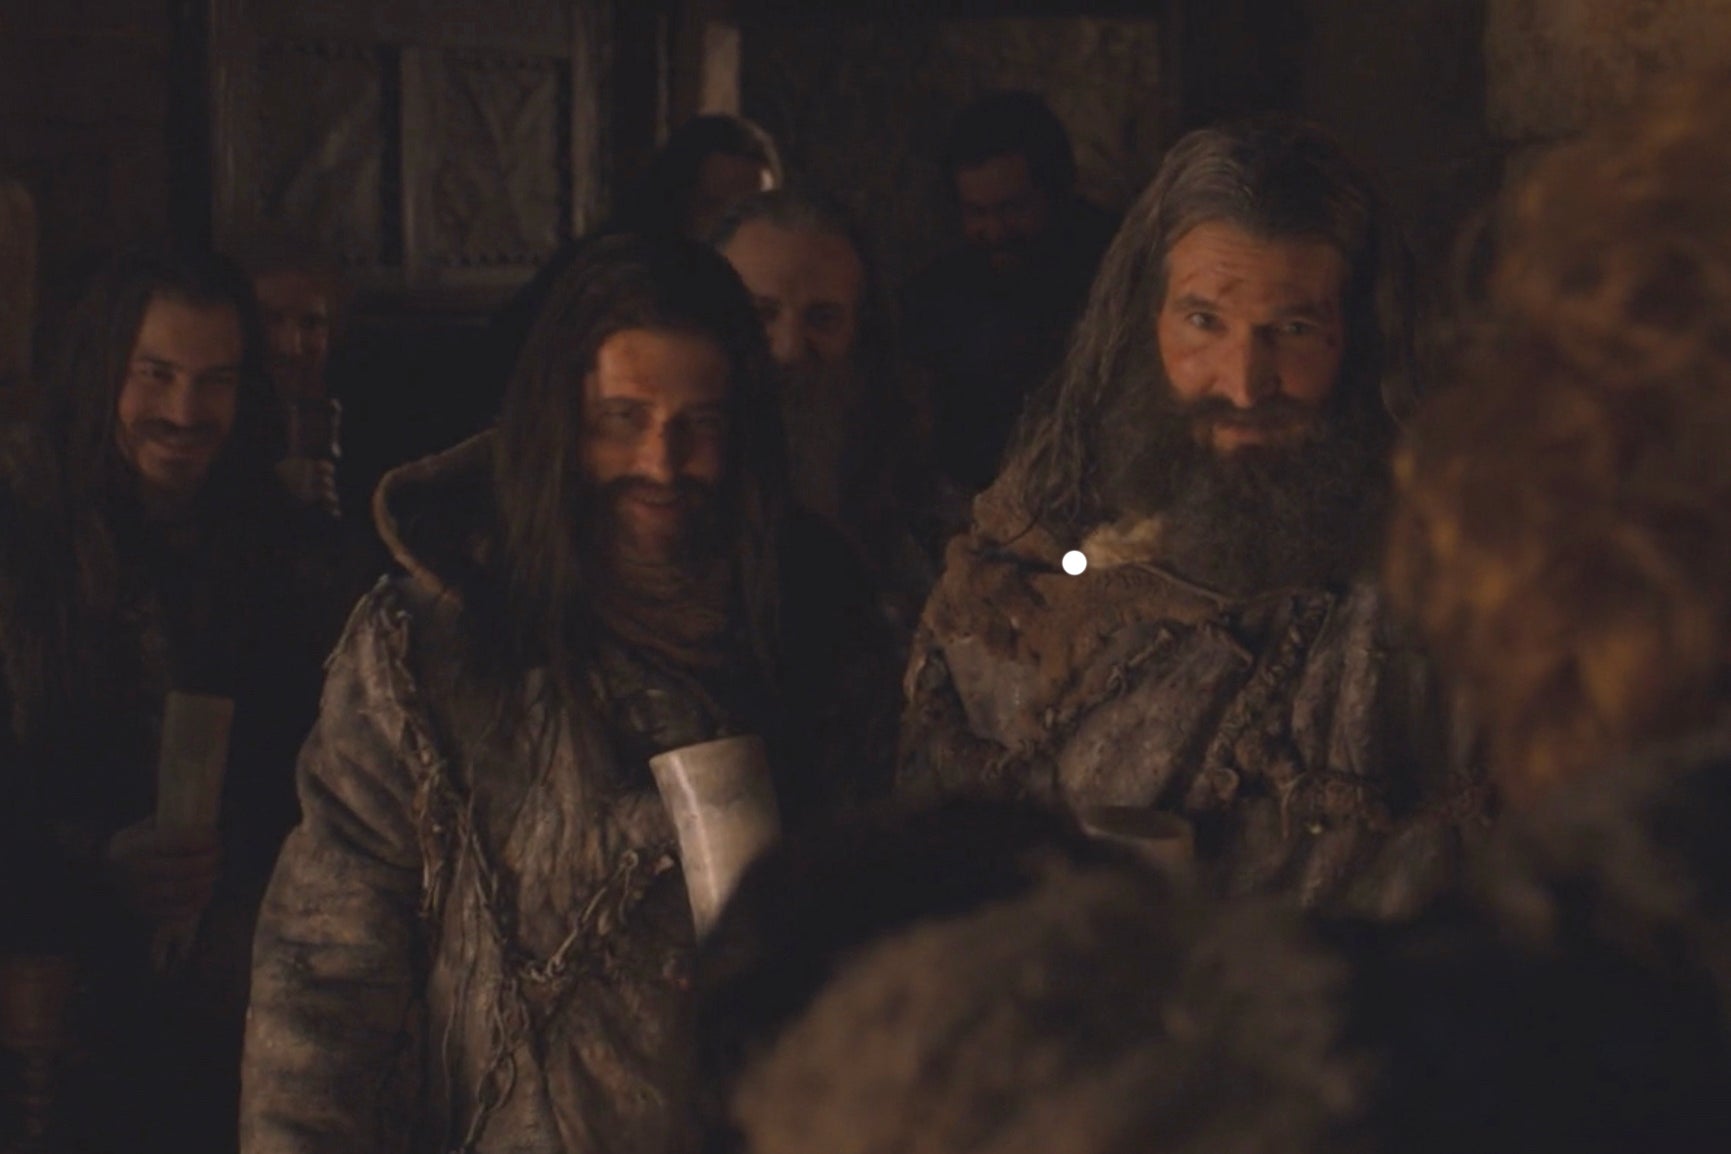 David Benioff and DB Weiss dressed as wildling soldiers after the Battle of Winterfell